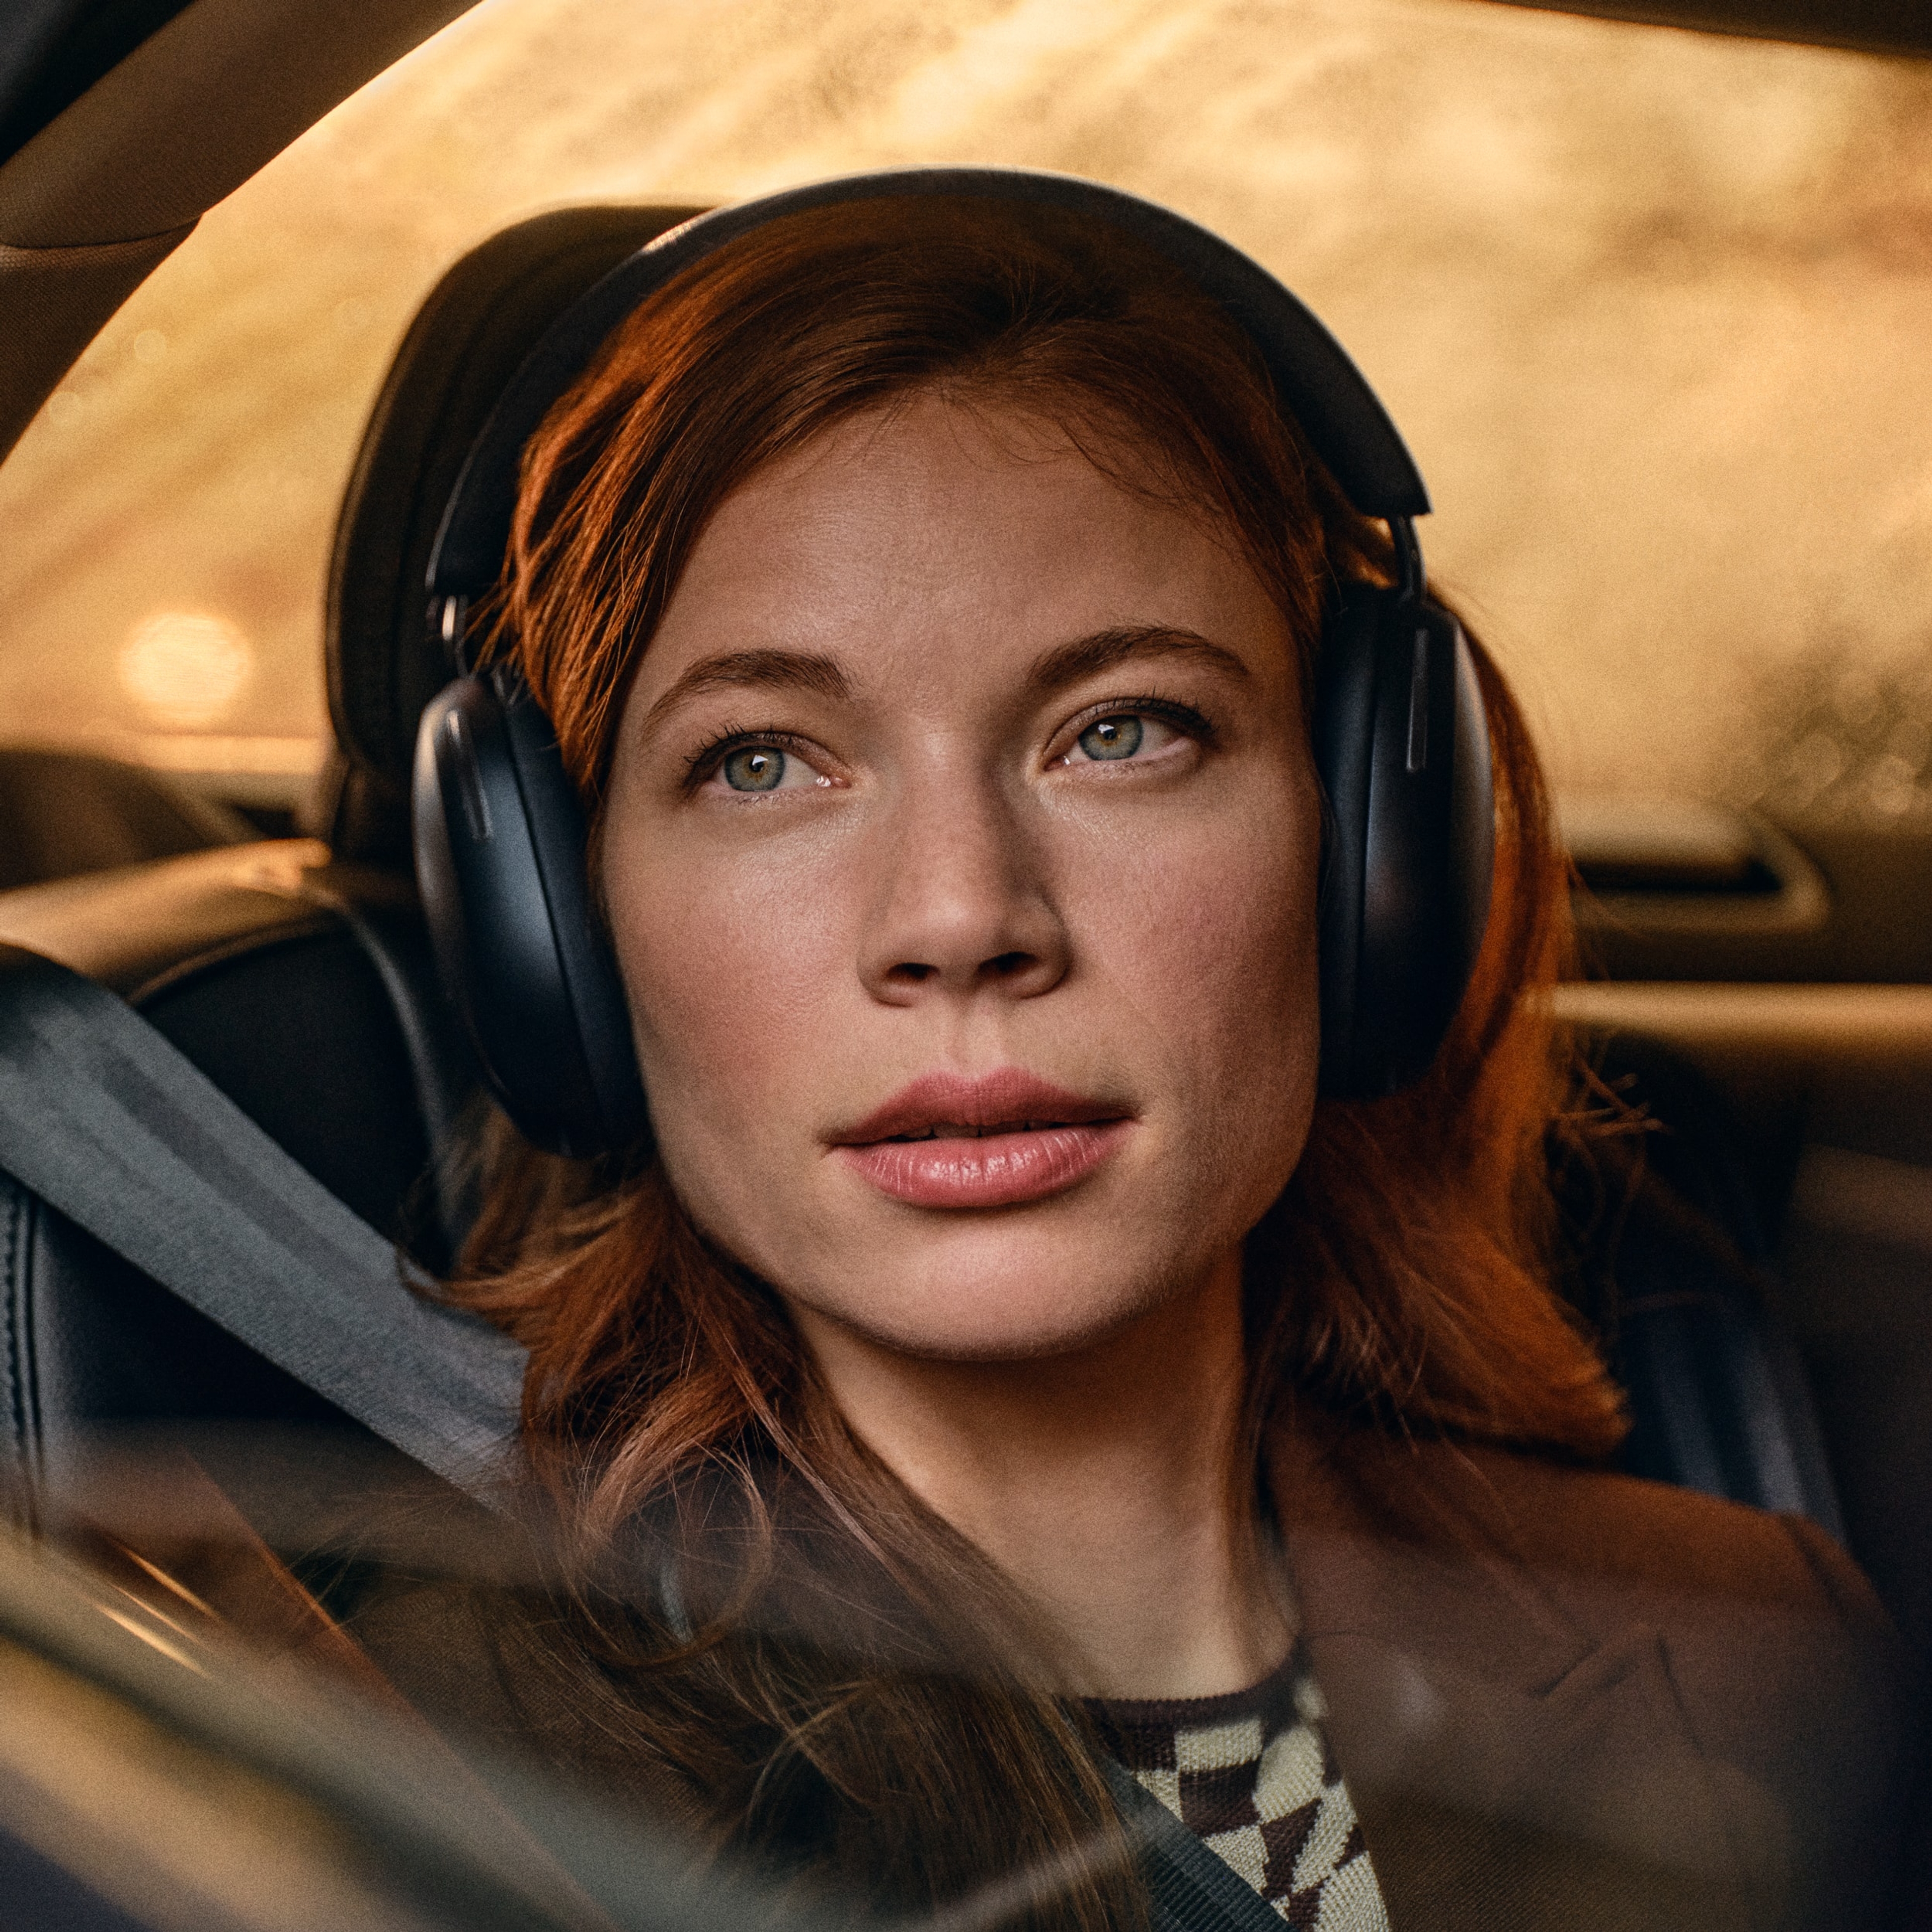 Female user wearing a pair of black Sonos Ace headphones while riding in a car